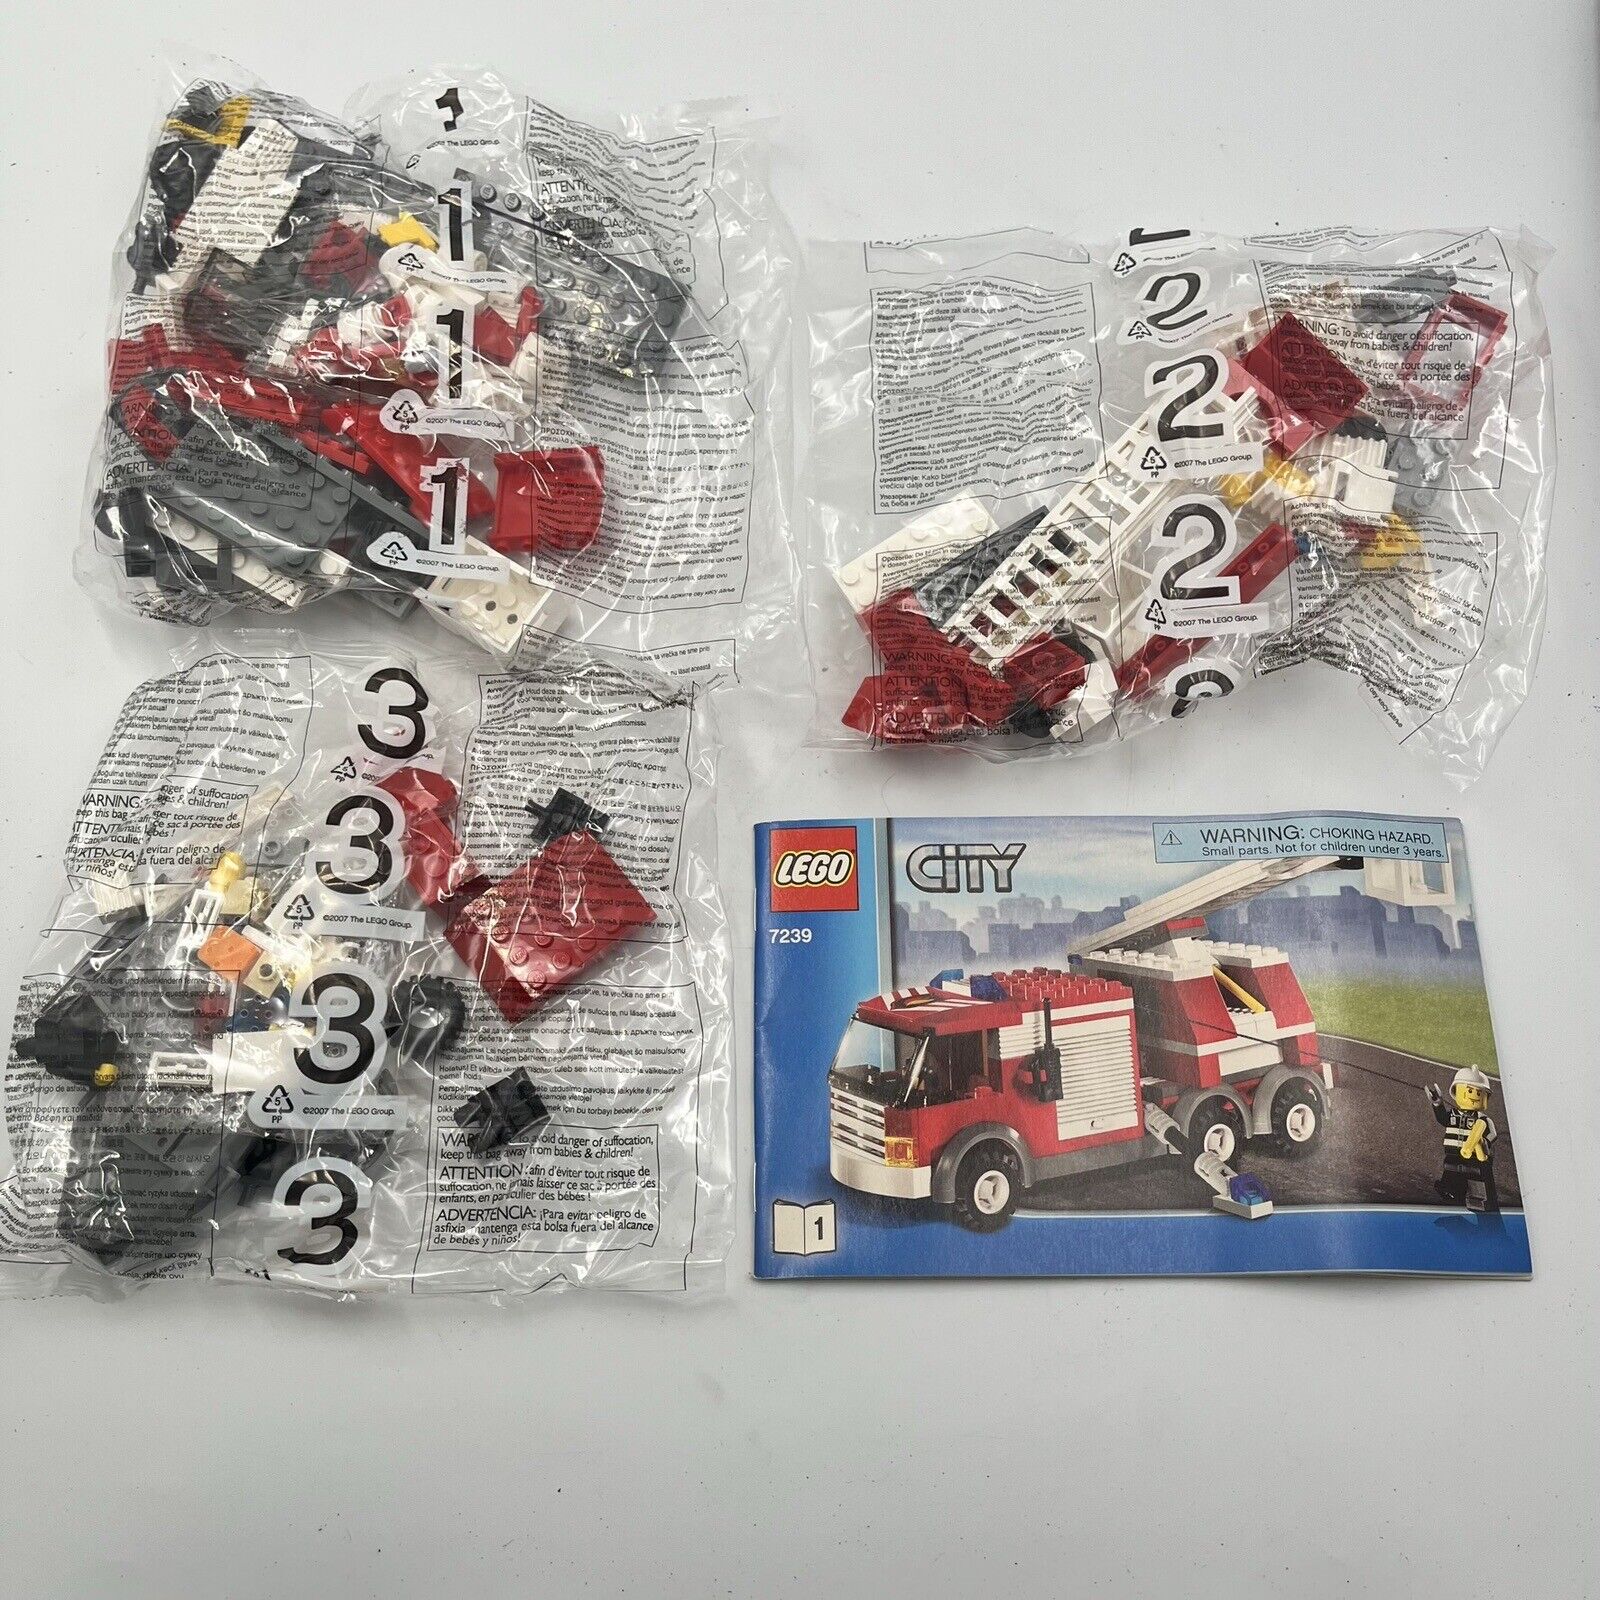 Lego City Fire Truck 7239 No Box All Bags Sealed Instruction For Truck